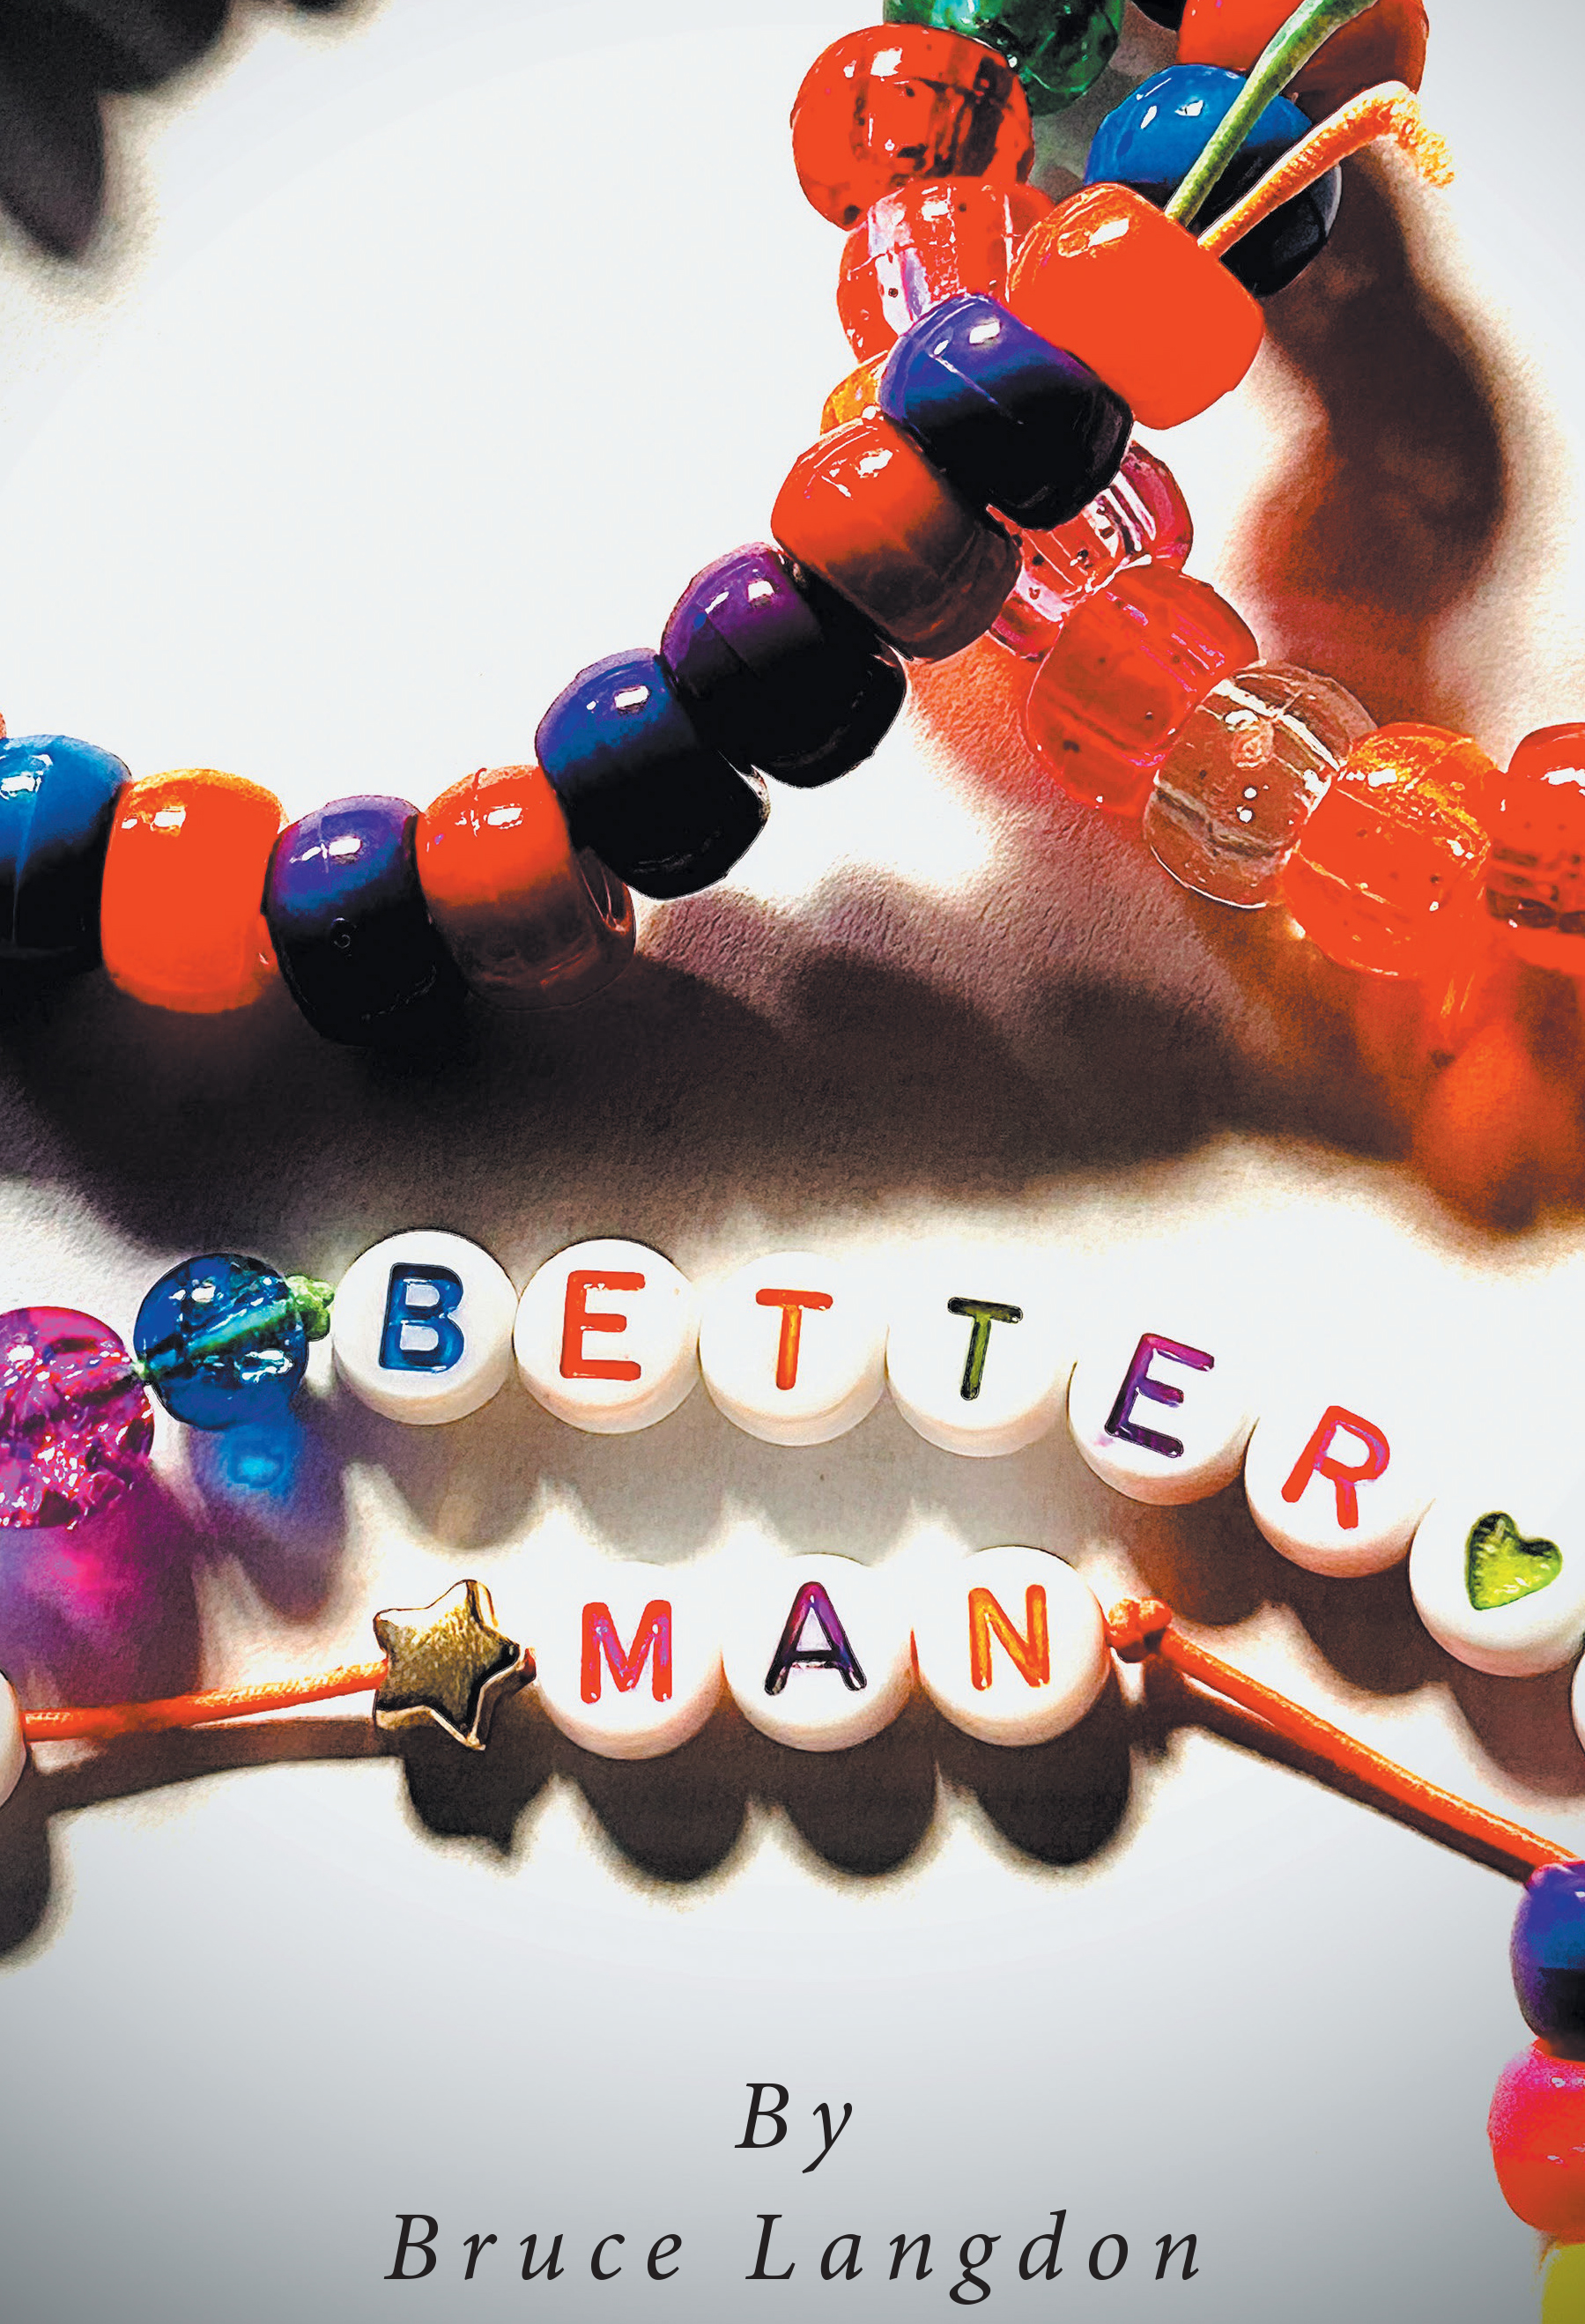 Bruce Langdon’s New Book, "Better Man," is a Compelling Look Back at the Author’s Journey Through Romantic Relationships, Including Both His Successes and Failures